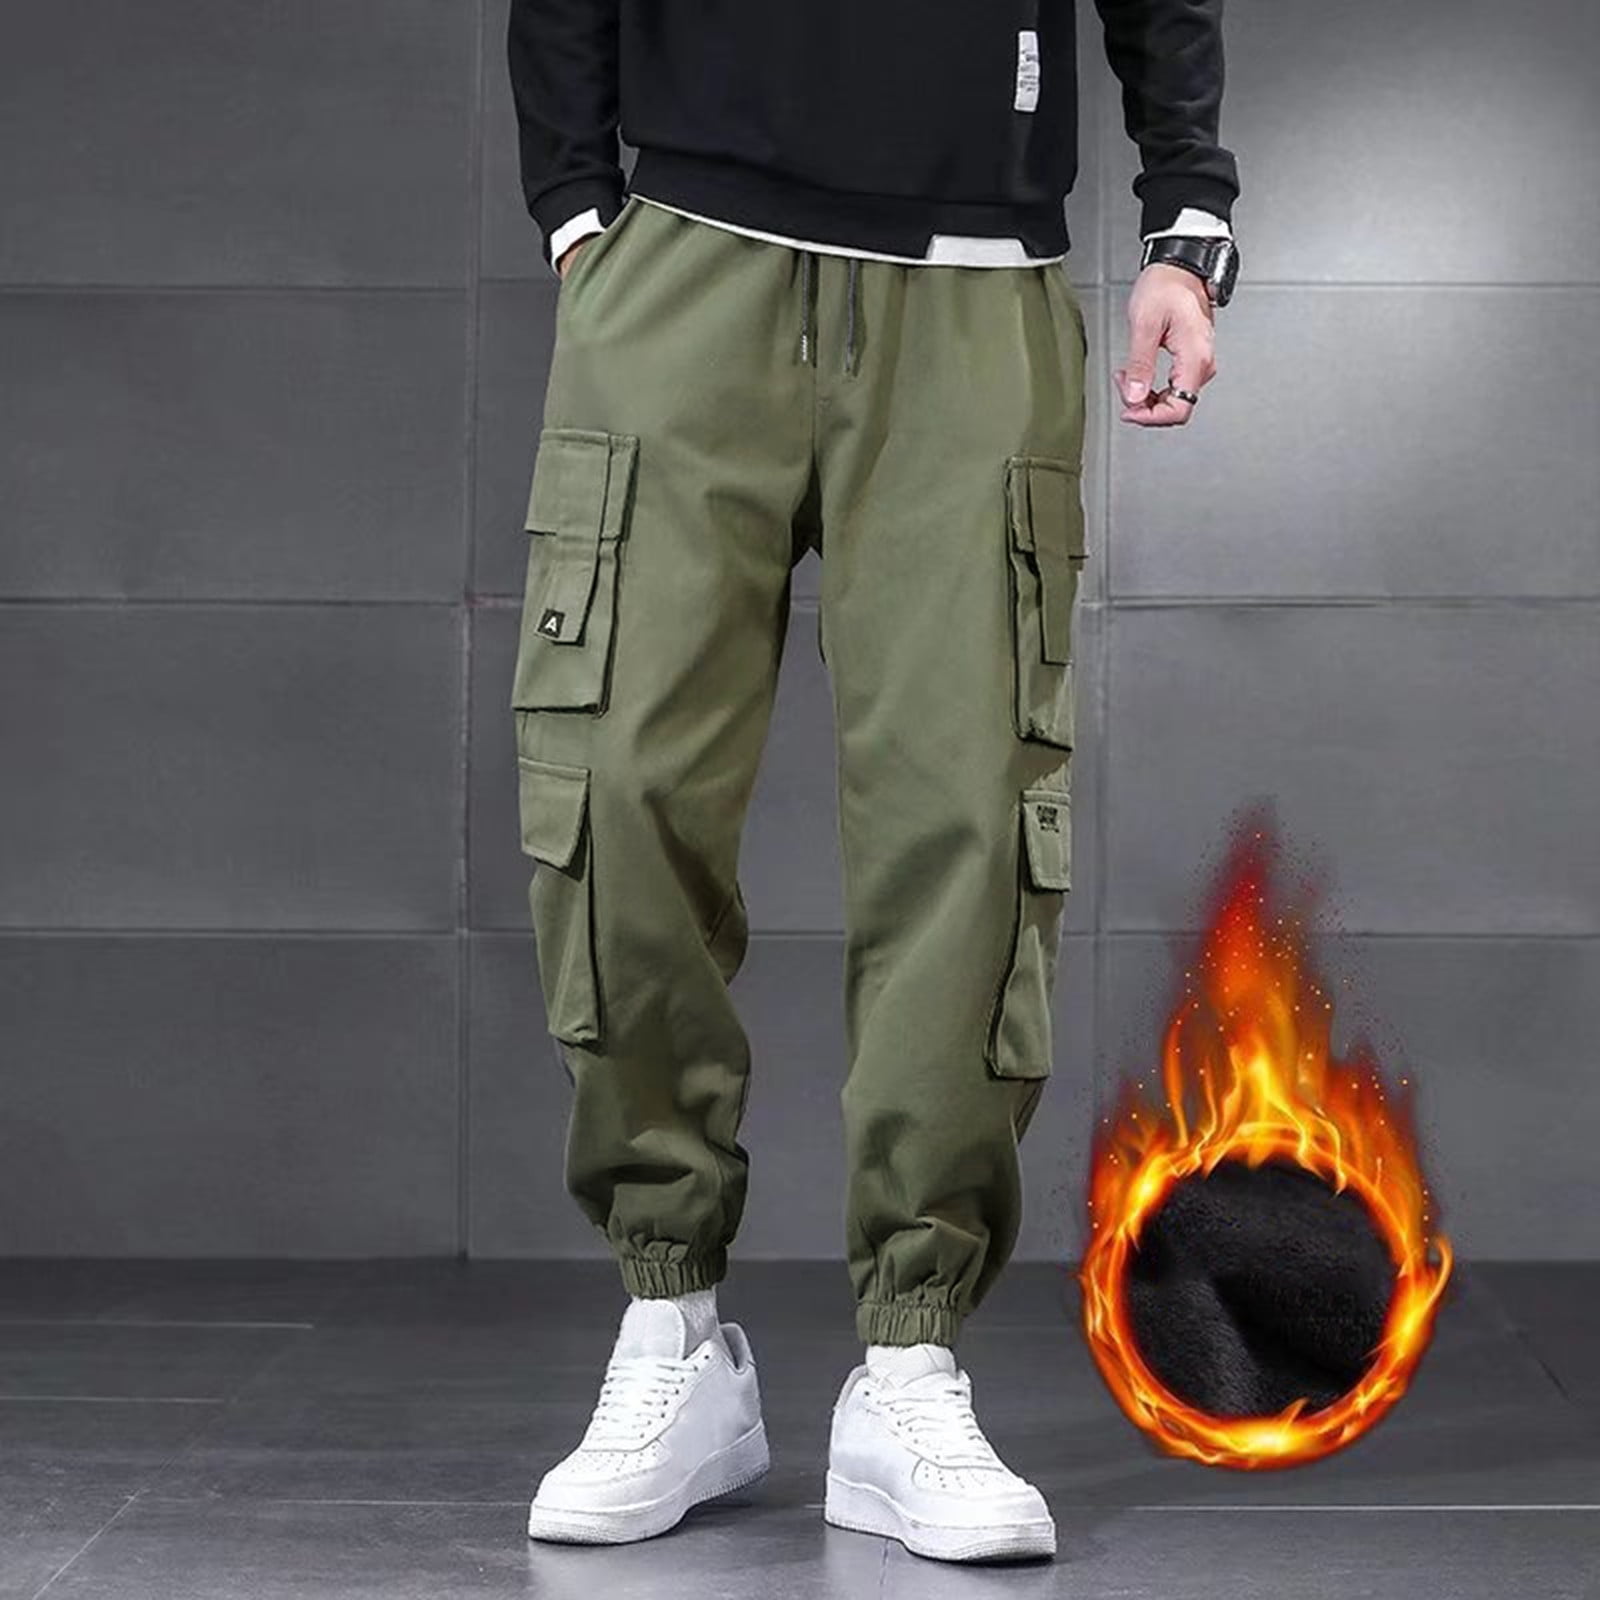 Mens Military Cargo Pants With Multiple Pockets Stretchable Cotton Army Trousers  Mens For Combat, SWAT, And Casual Wear Available In Plus Sizes 28 40.5x  From Herish, $16.73 | DHgate.Com